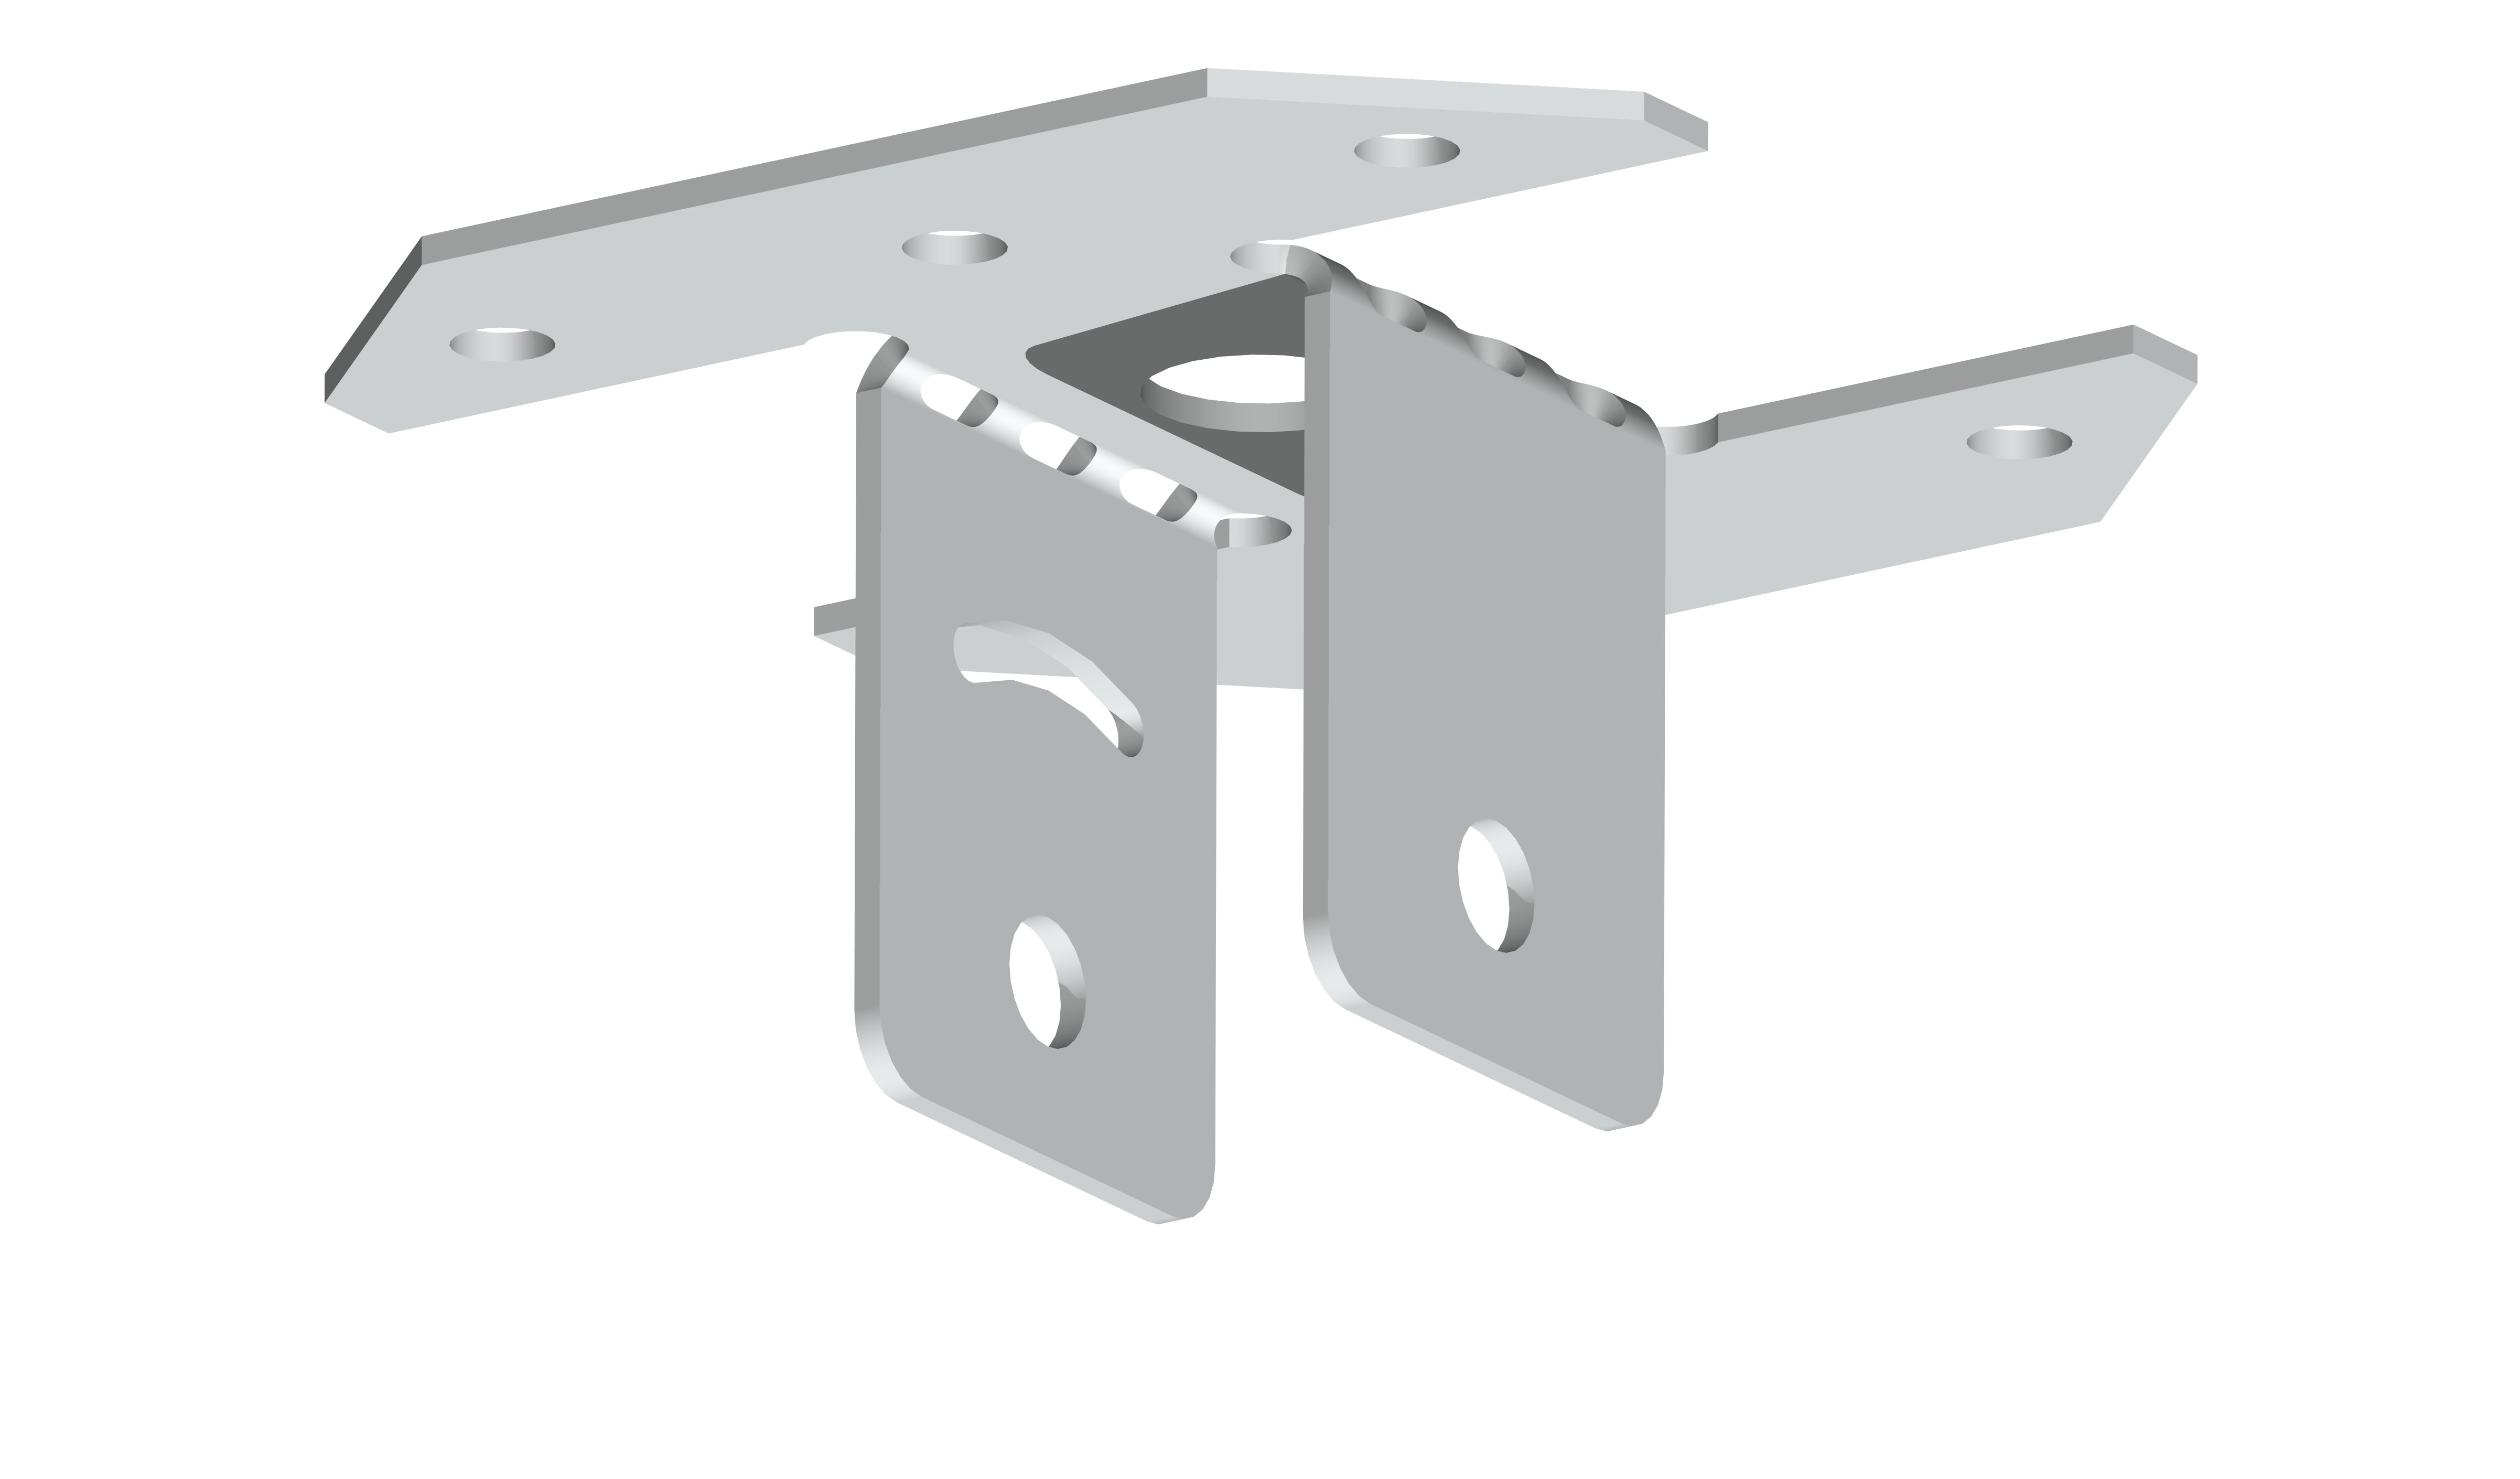 SECURITY DESIGN CO CEILING MOUNT BRACKET SUITS DOME WHITE ALUMINIUM ALLOY 14 KG MAX LOAD USED WITH TDDC1U WITH 32 & 28MM POLES